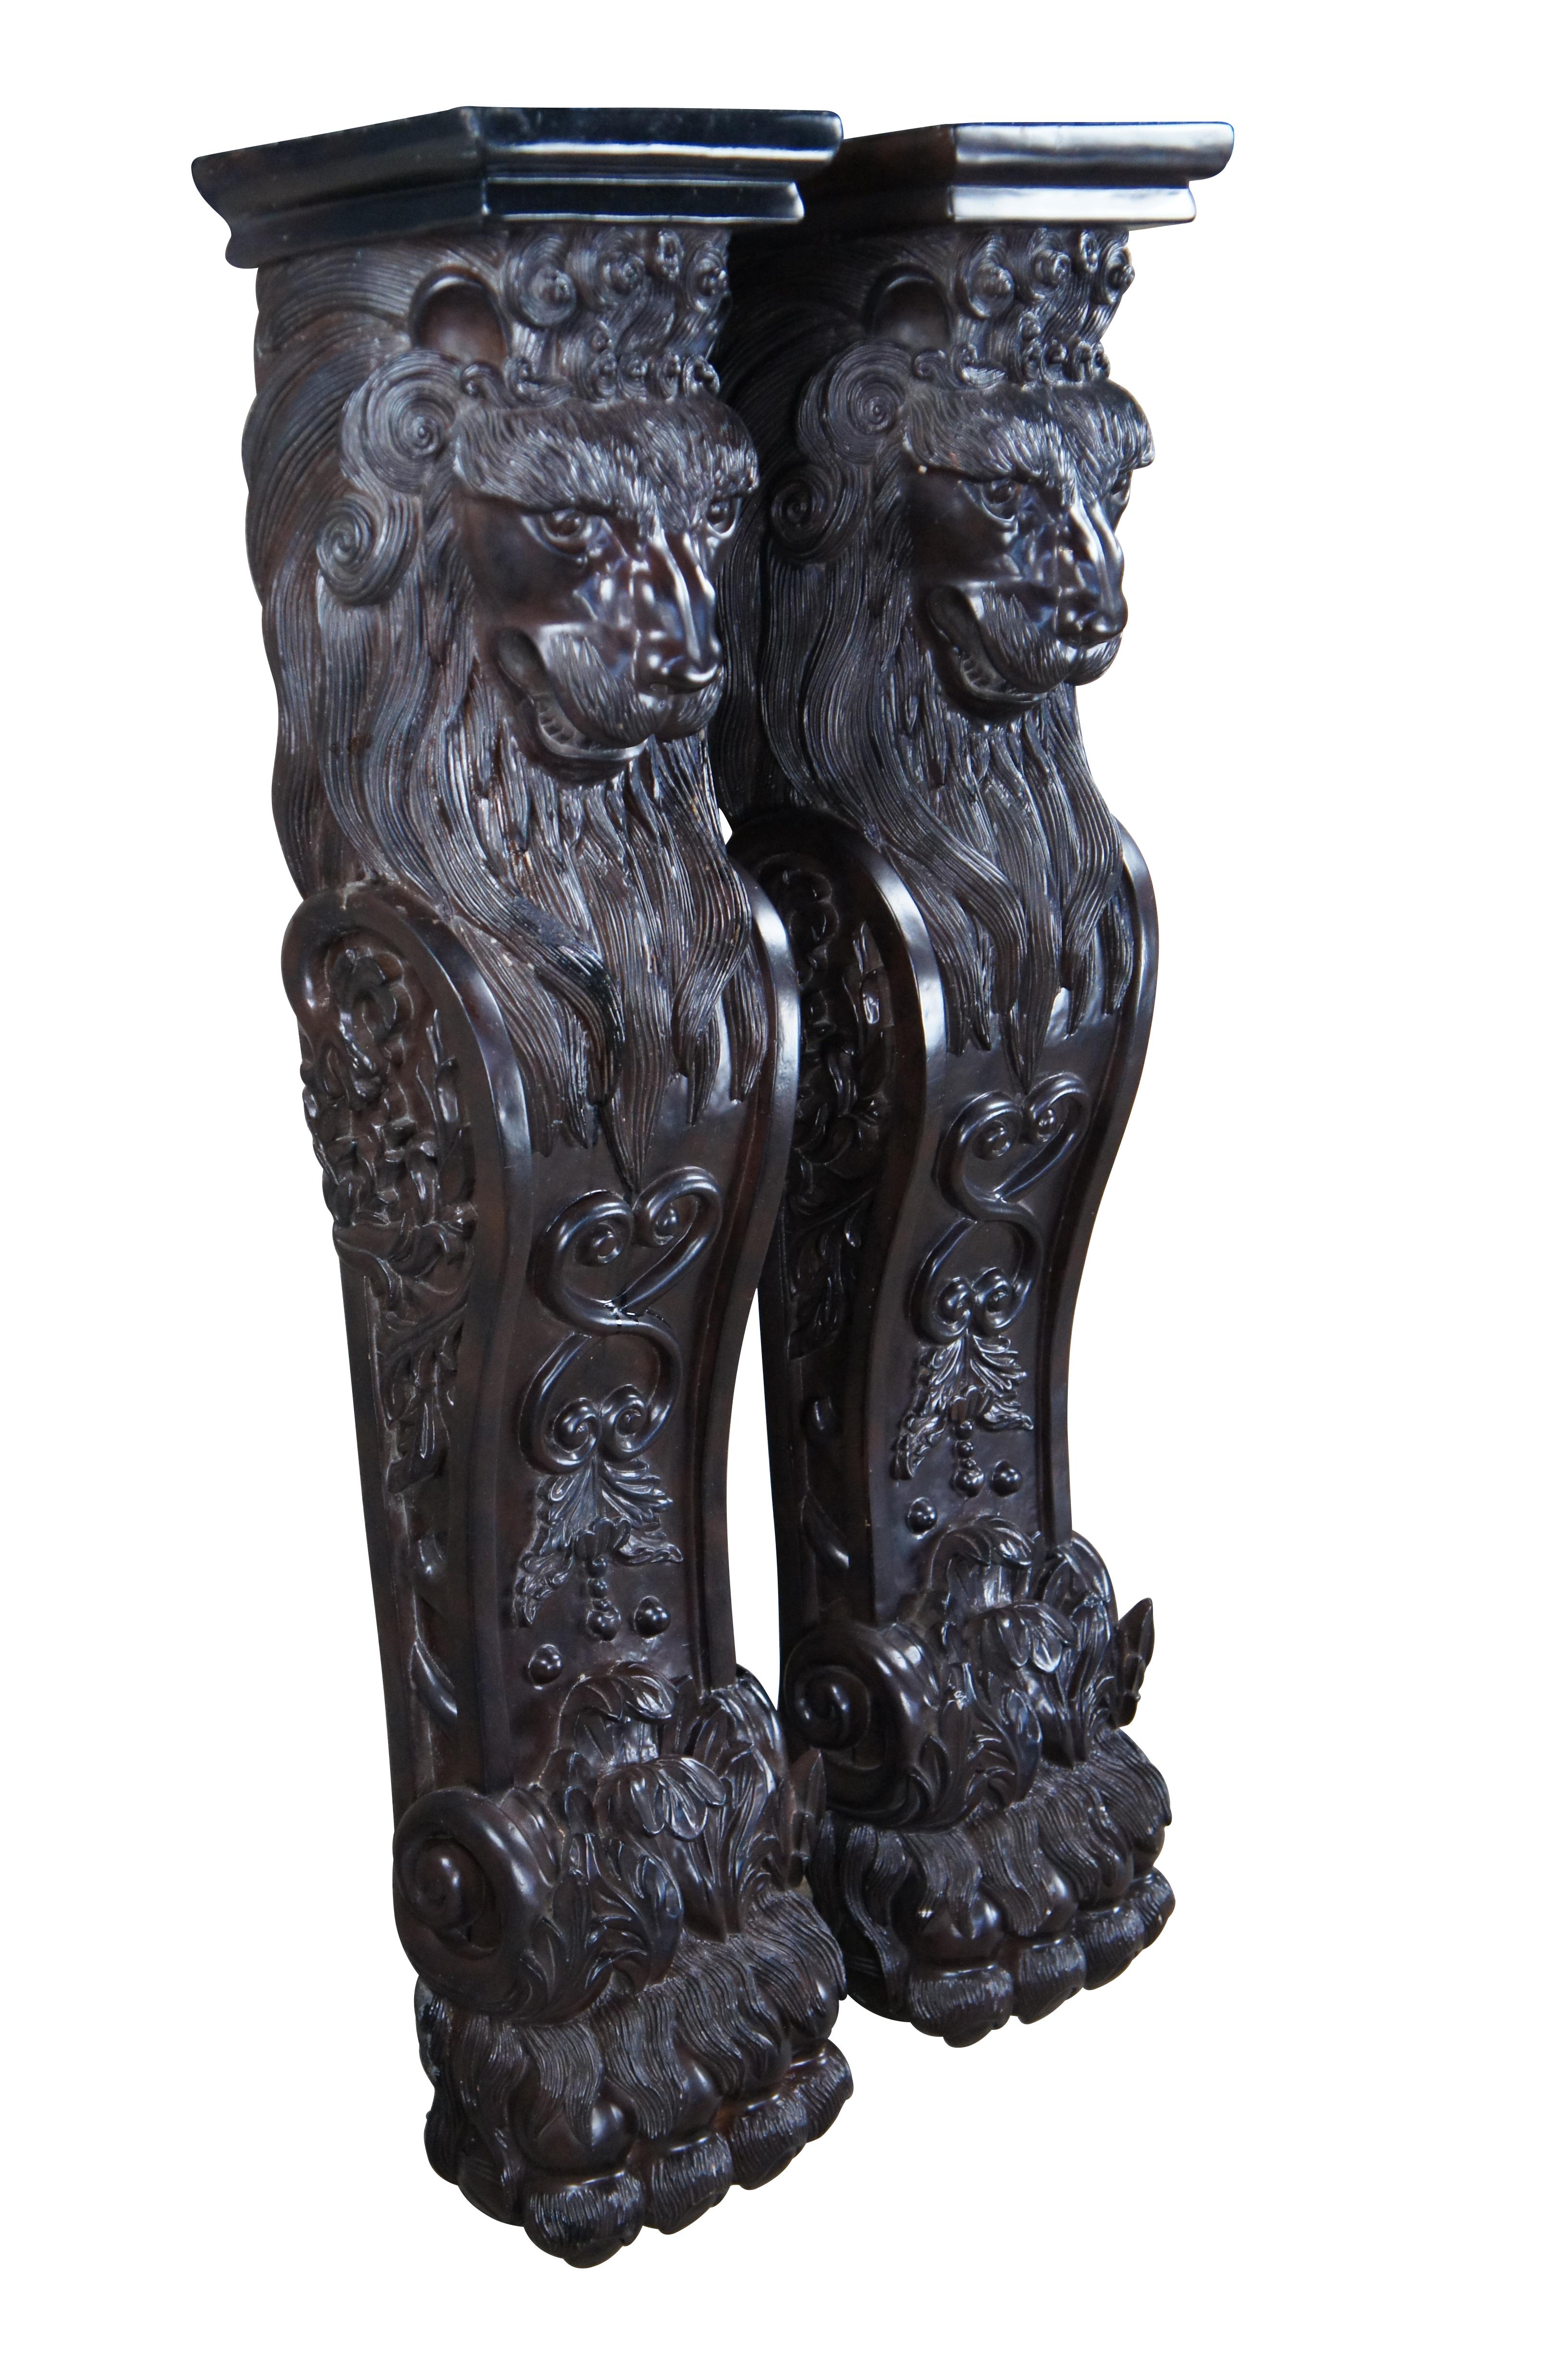 Pair of two vintage Raymond Enkeboll style columns / corbels / pillars / stands.  Made of composite featuring ornate lion heads, acanthus designs, and hairy paw / claw feet. 

Dimensions:
10.5